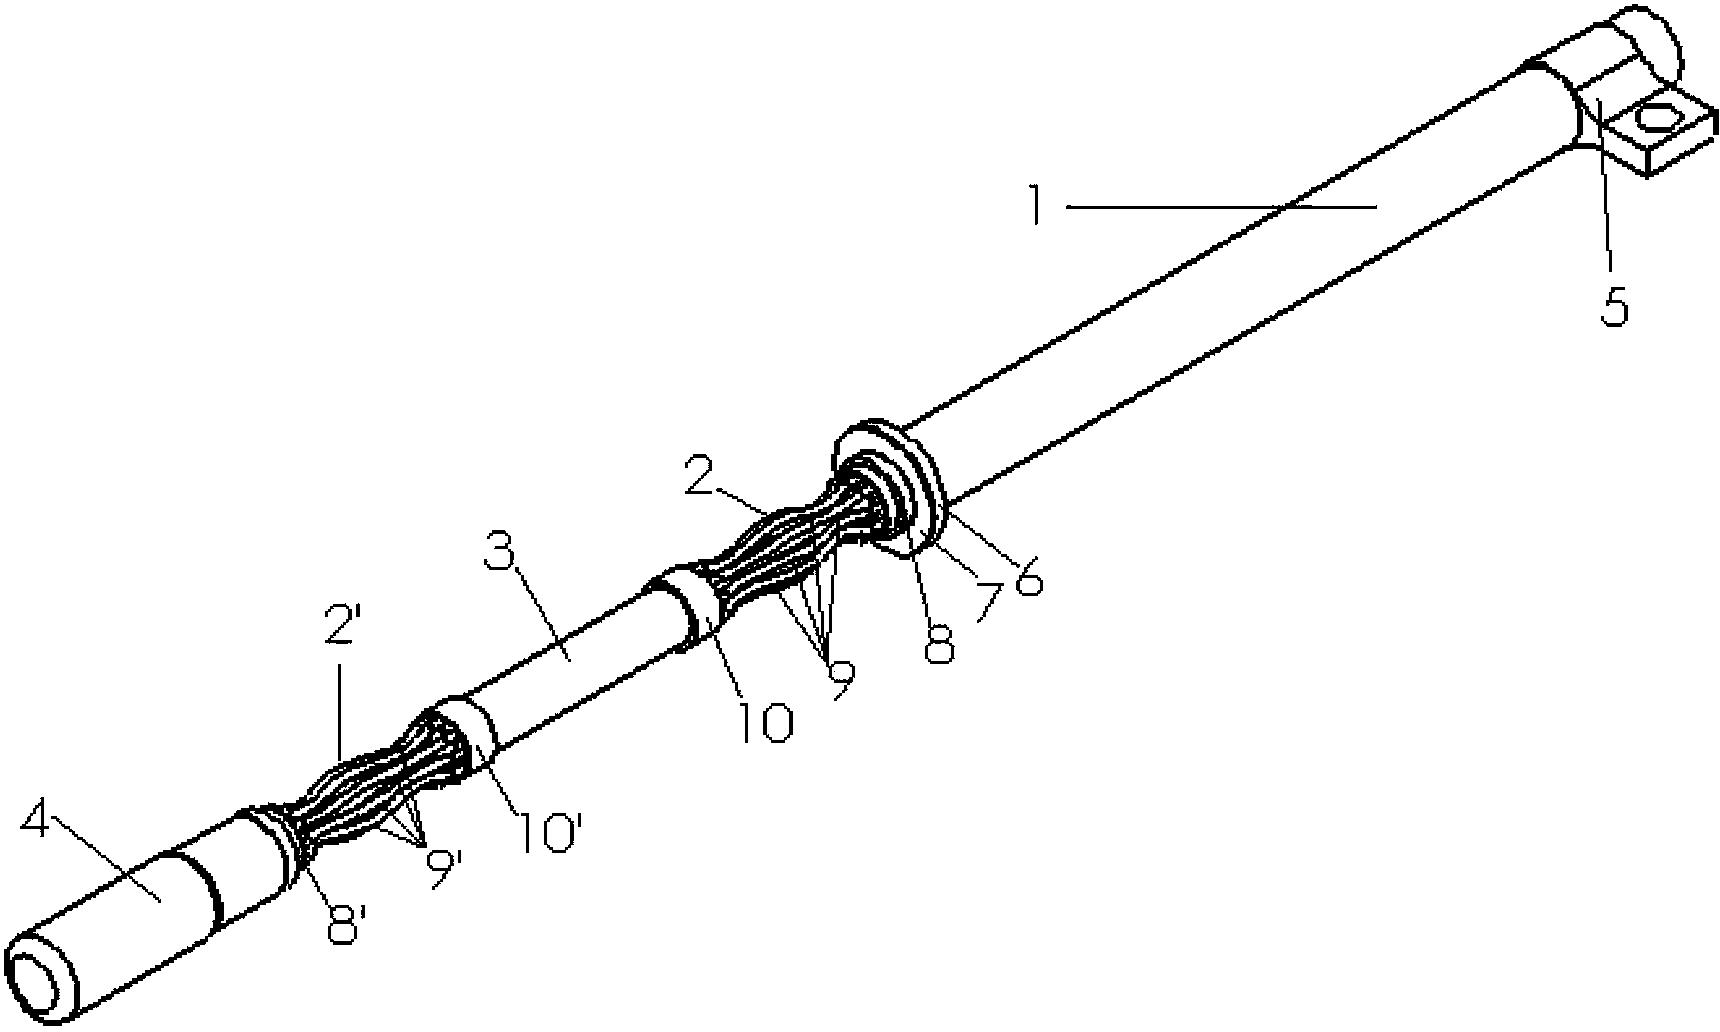 Binary pluggable vapor cooled current lead device